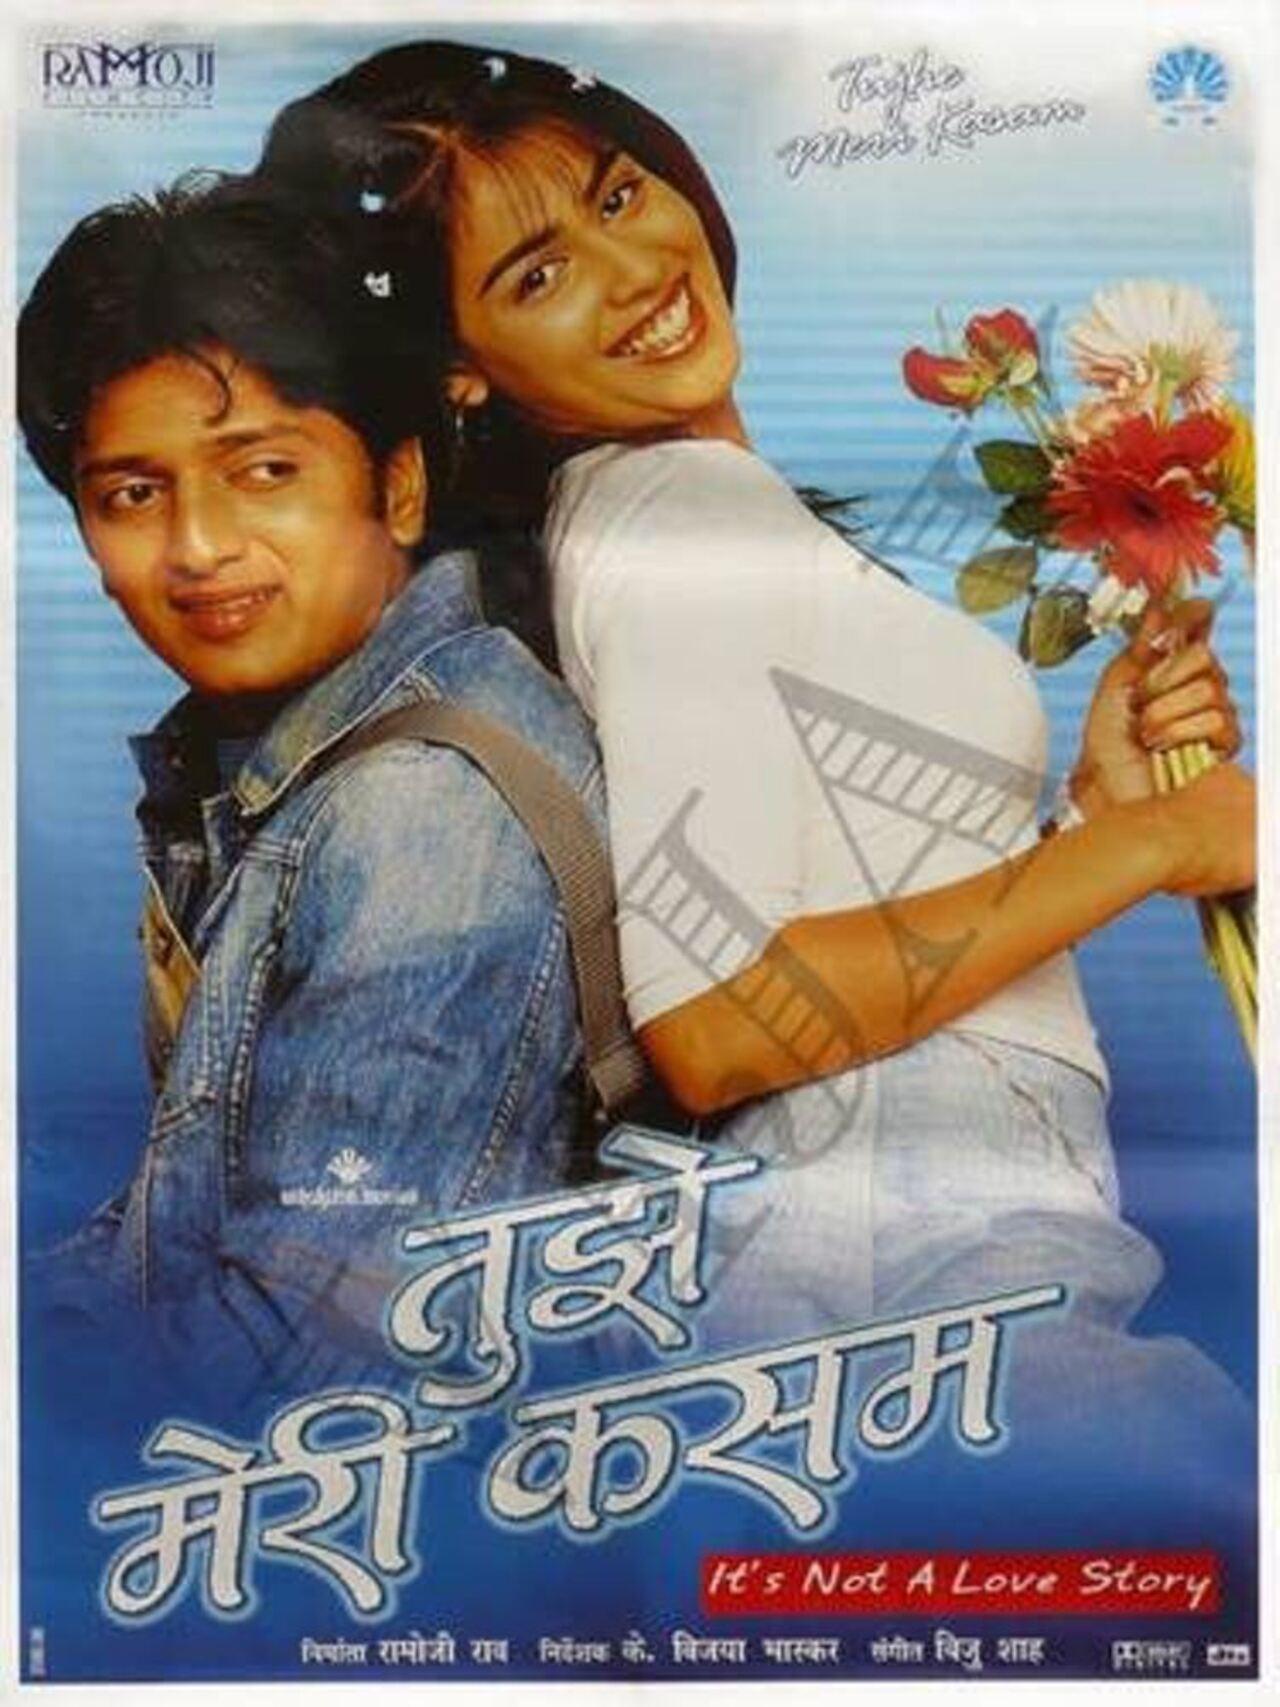 When Genelia was offered a role in 'Tujhe Meri Kasam', initially she turned it down, as she was not keen to pursue a career in acting. The team kept contacting her for two months and she was convinced only after watching the Telugu version. Her first was also opposite Riteish Deshmukh, who is now her husband